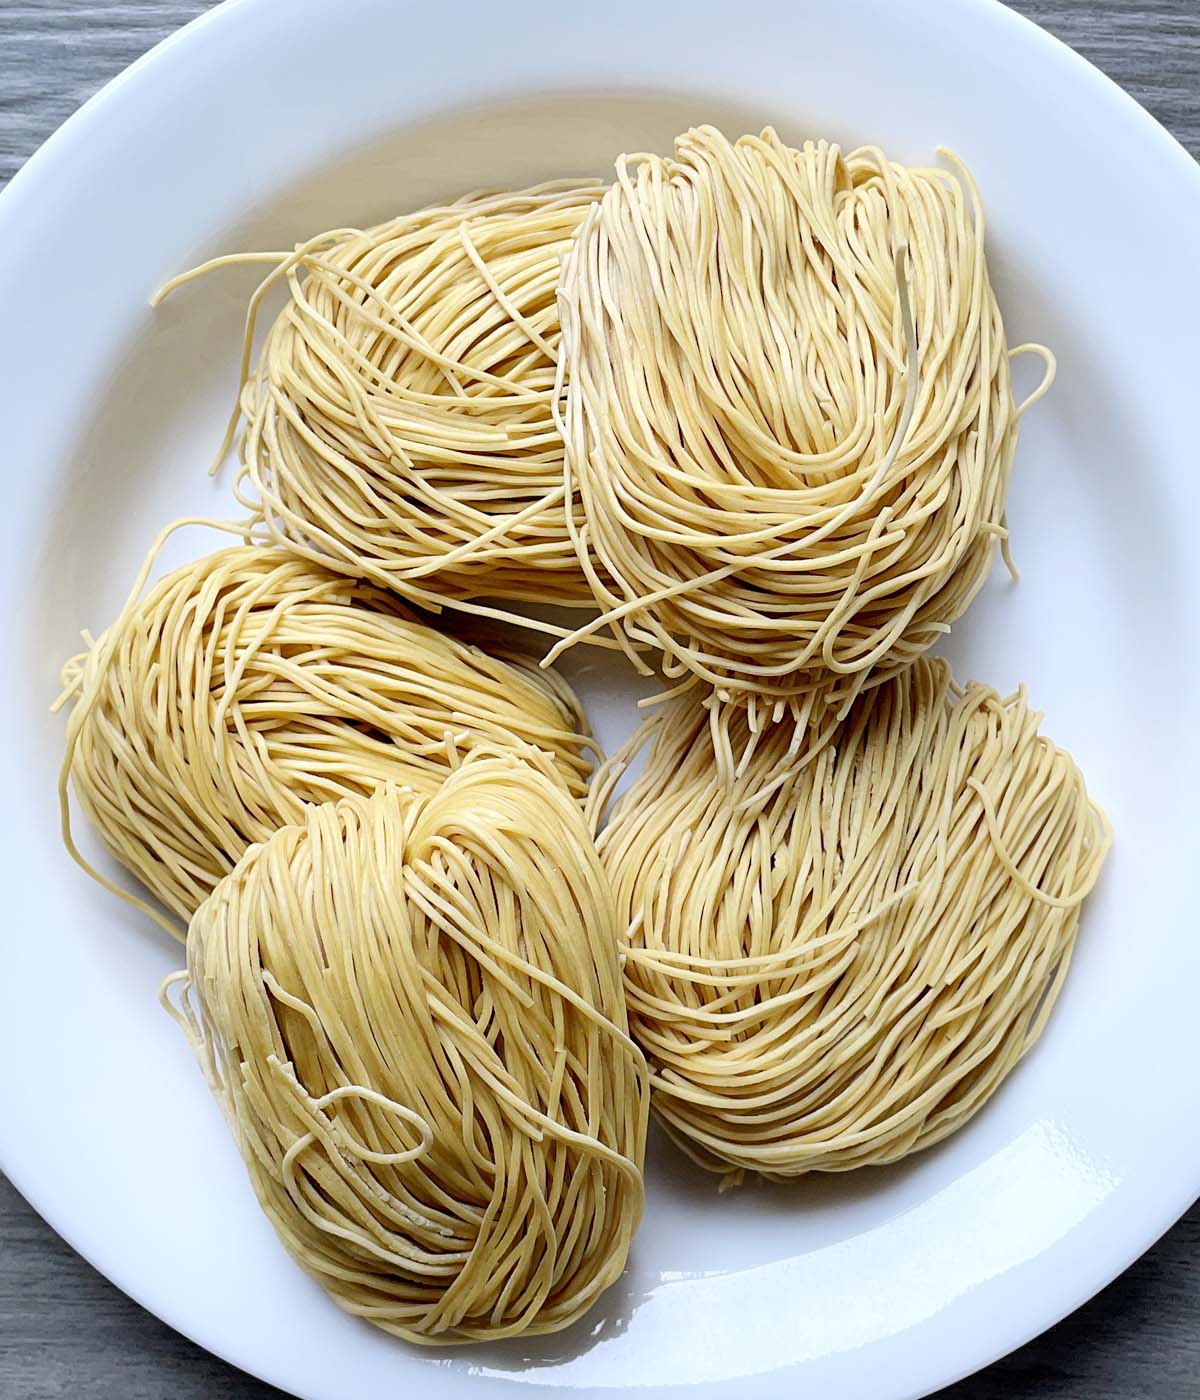 A white plate containing five bundles of dried yellow noodles.